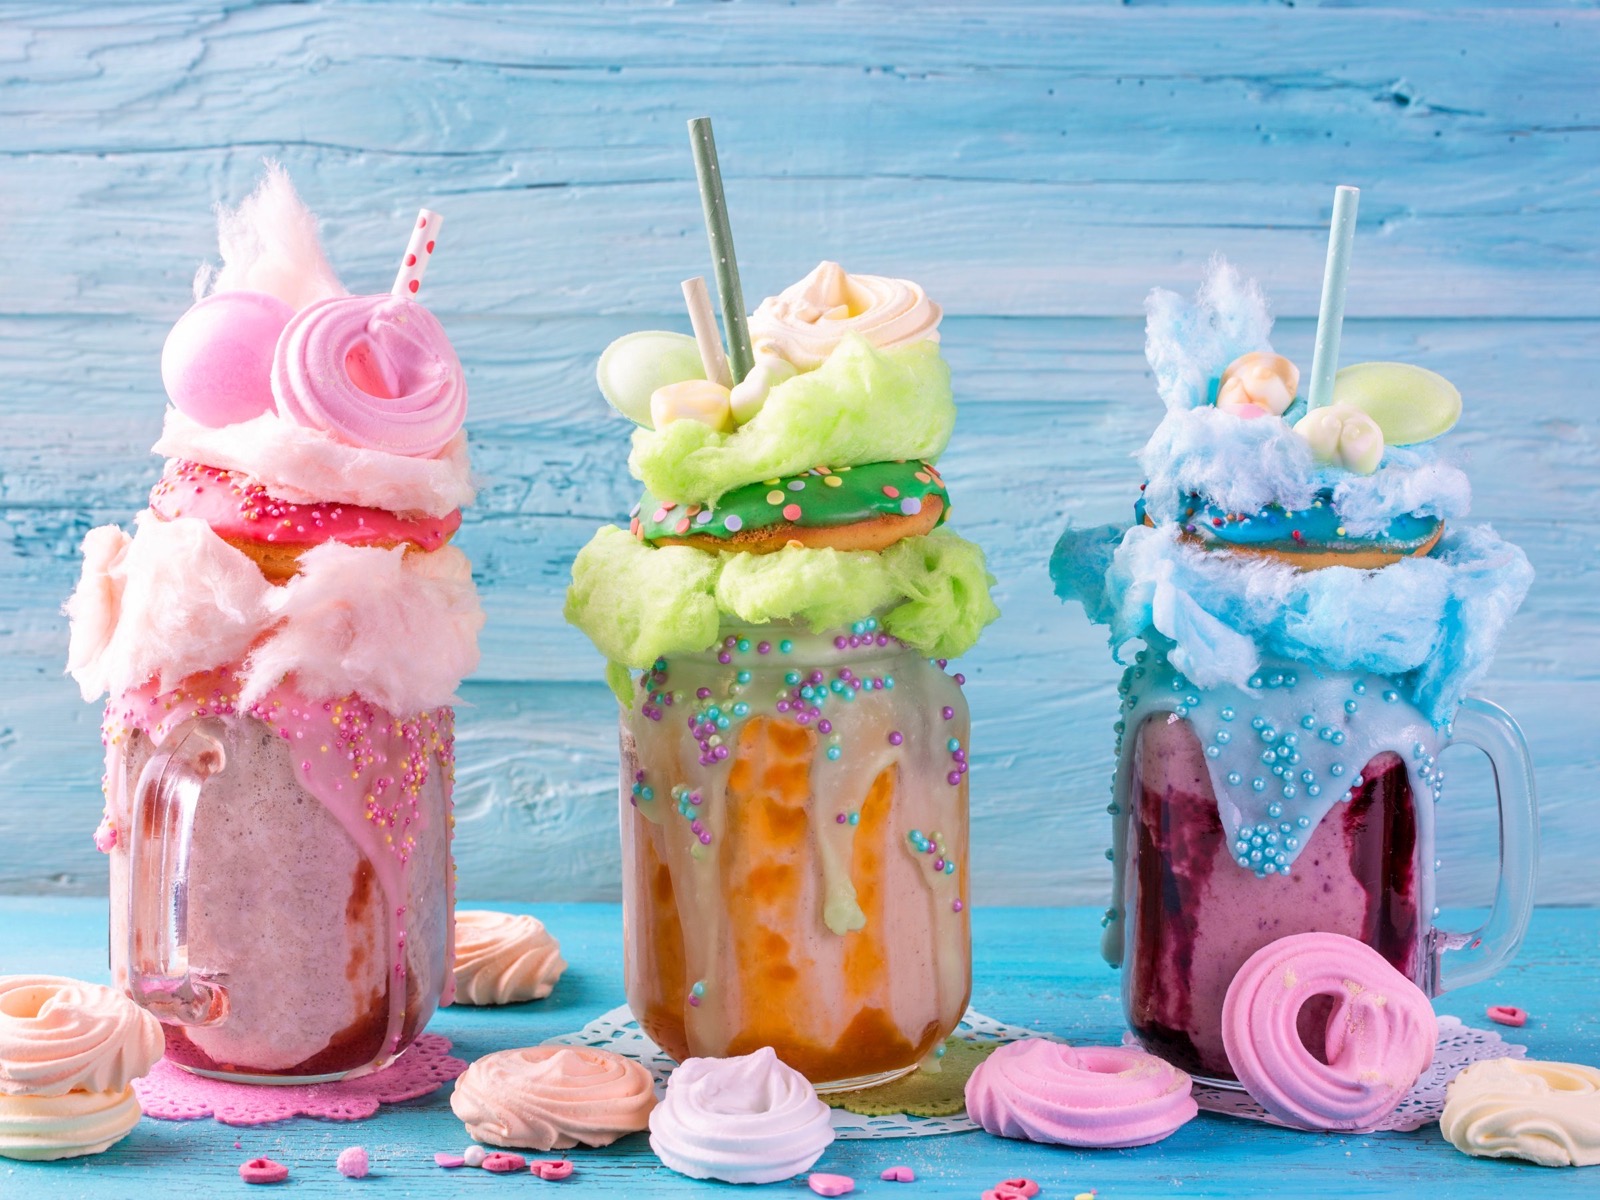 Say “Yum” Or “Yuck” to These Trendy Foods to Find Out What People Hate Most About You Hipster Milkshakes Freakshakes